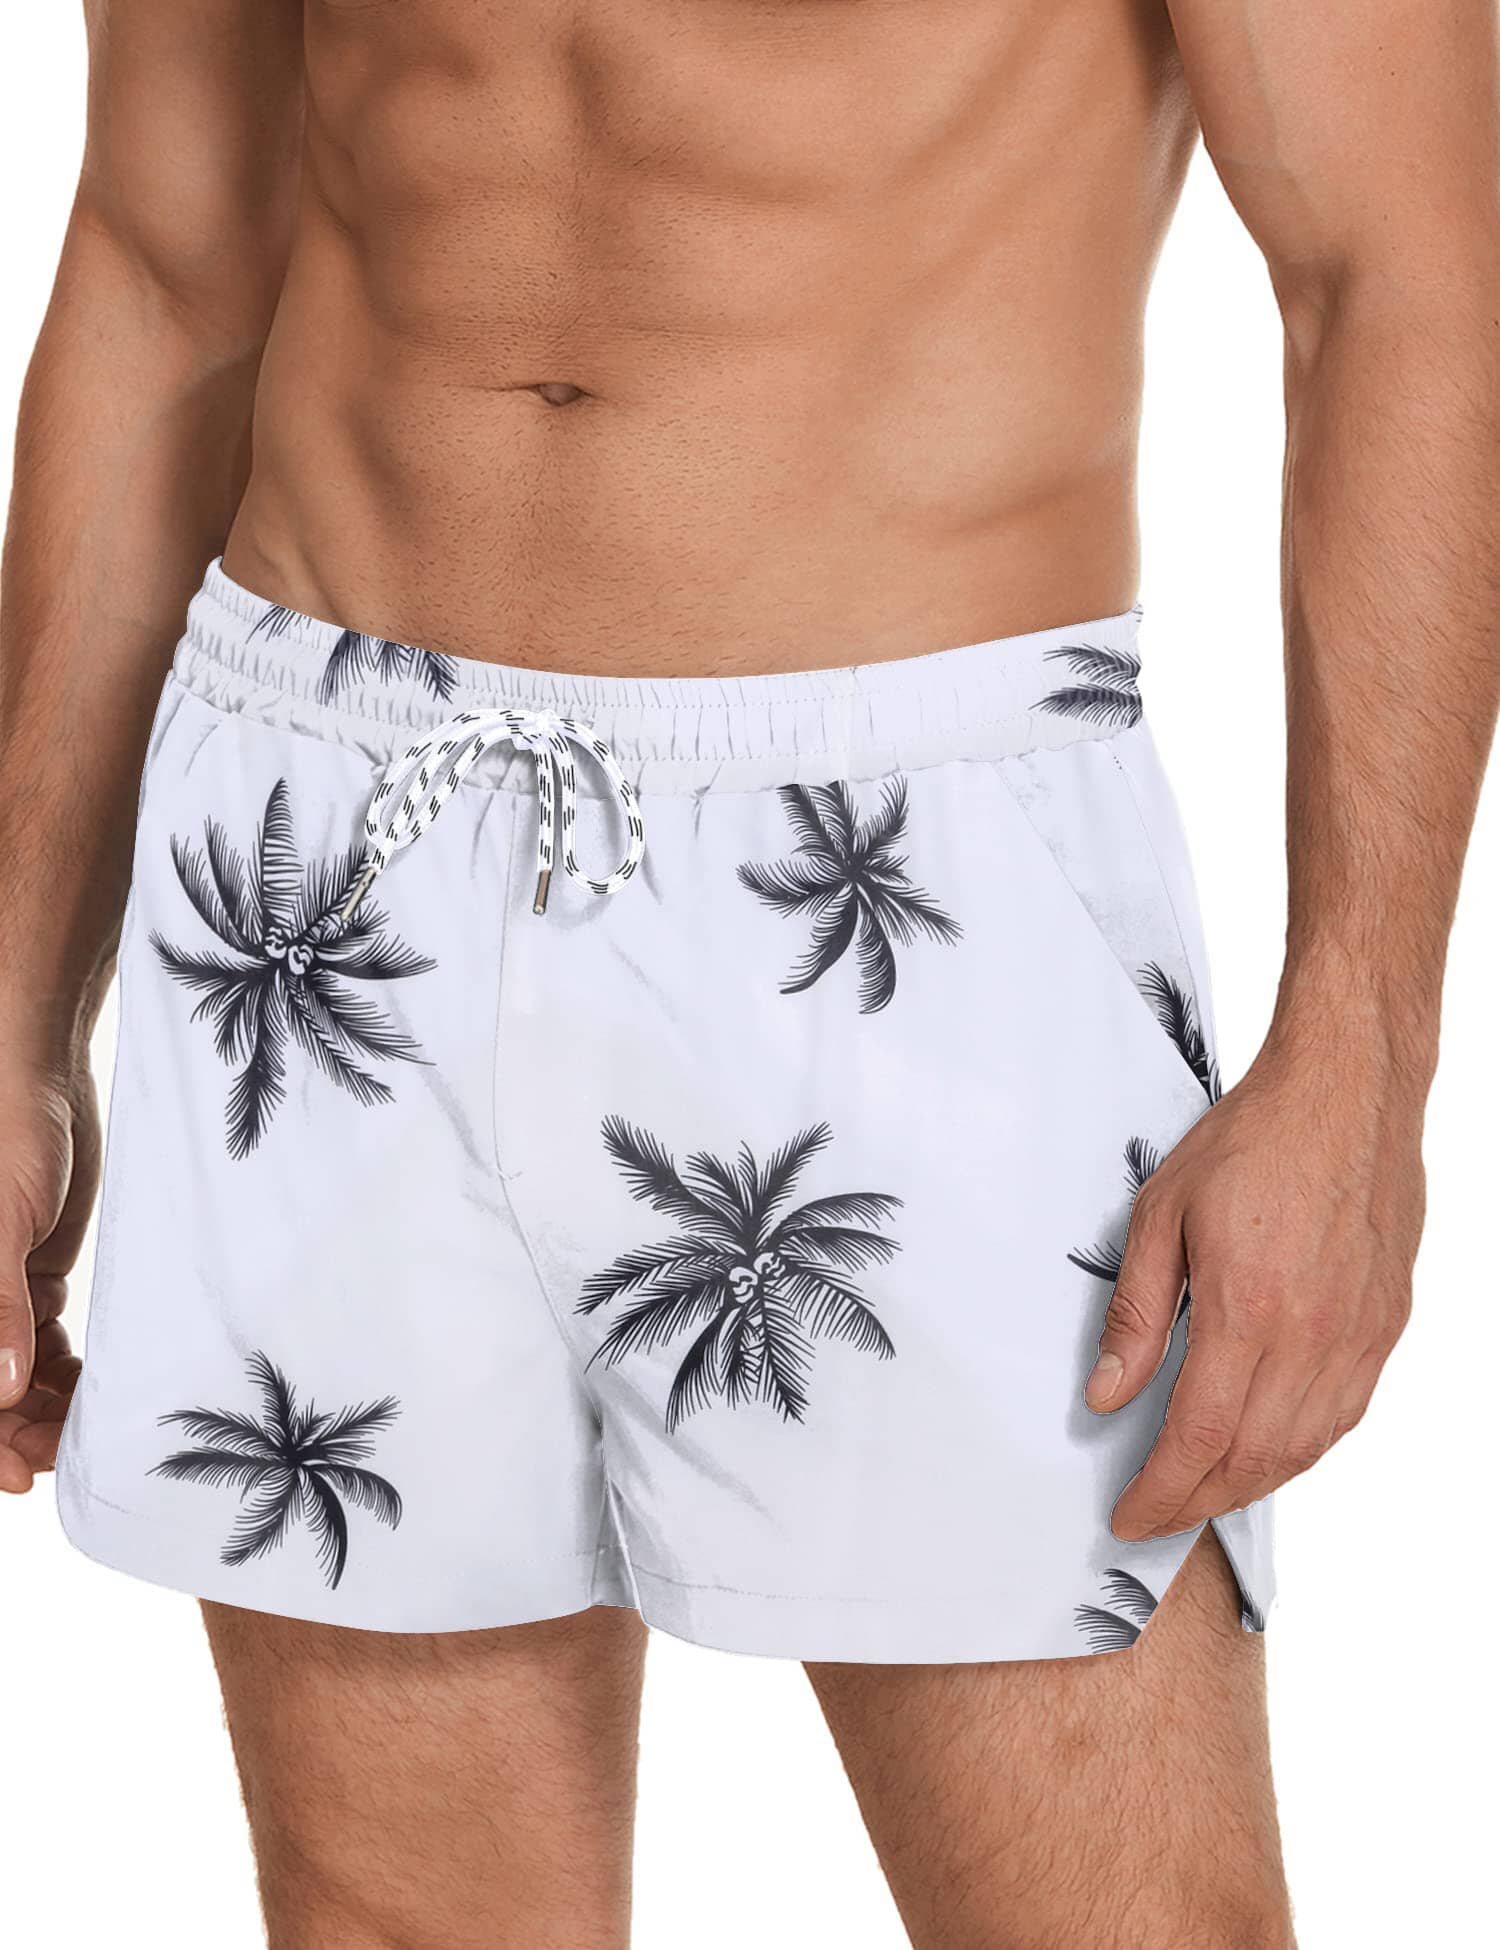 Classic Quick Dry Sport Shorts (US Only) Shorts COOFANDY Store White and Leaves S 